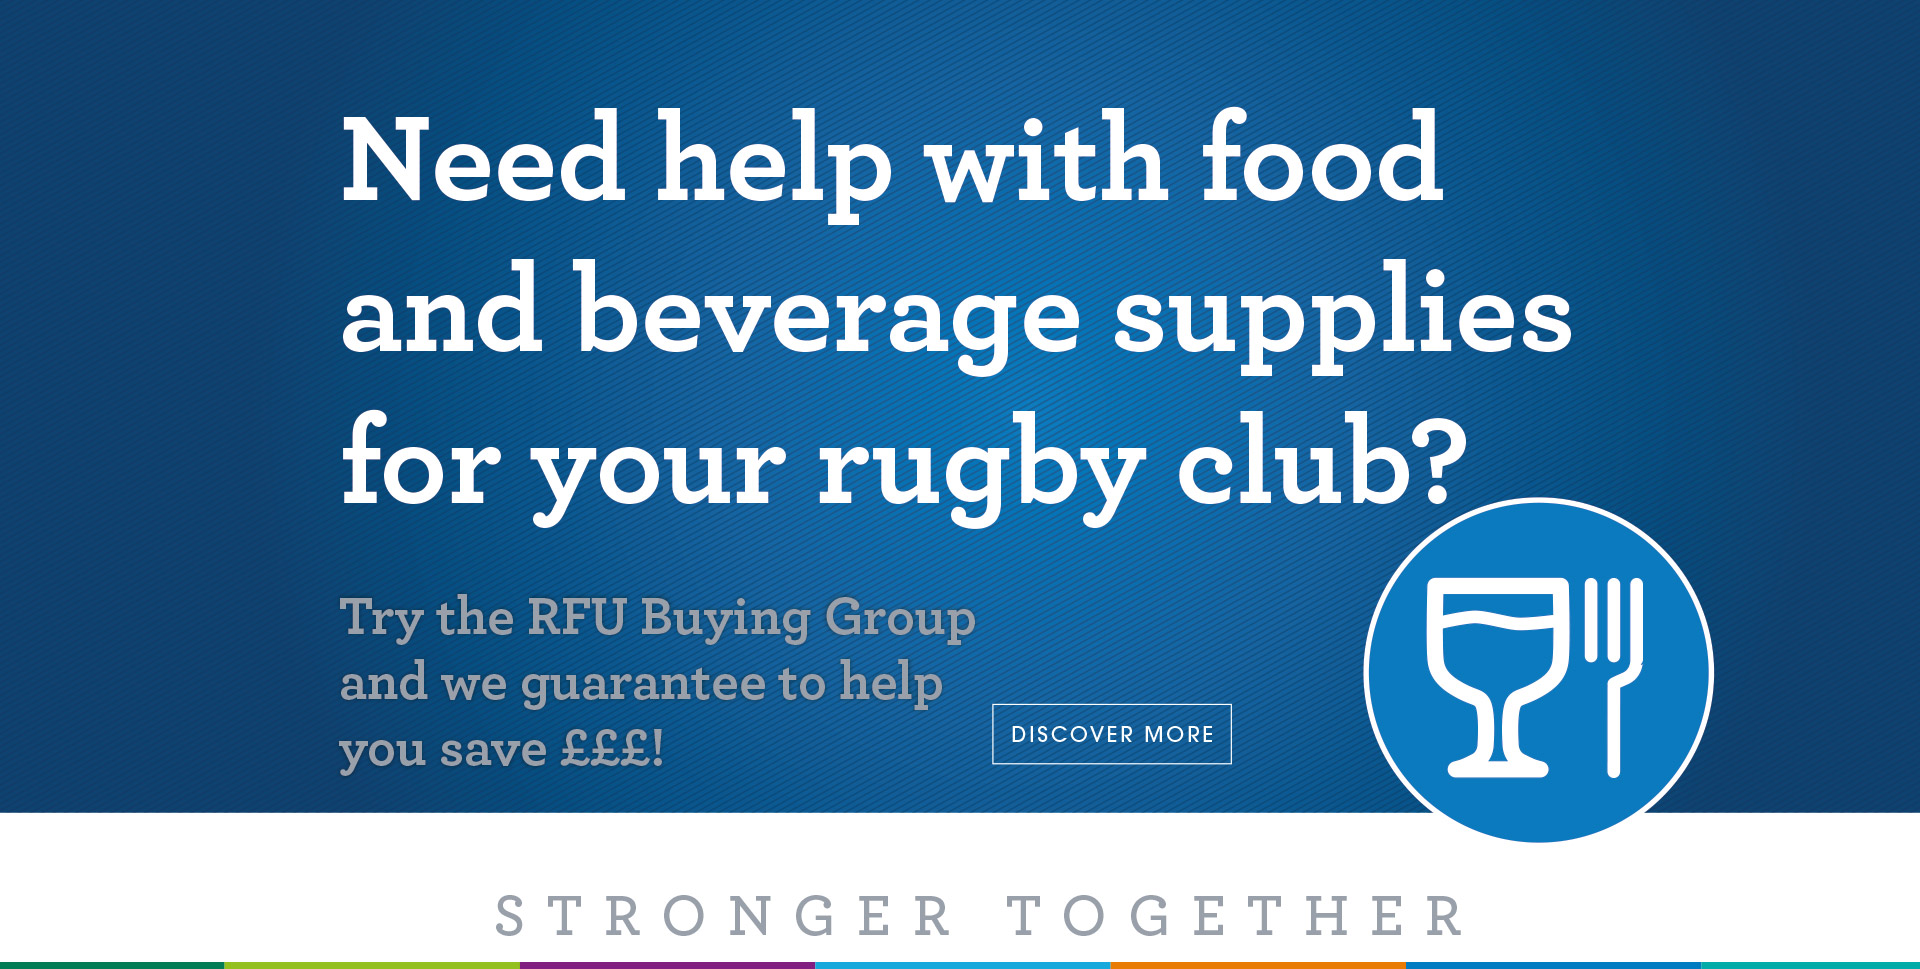 Need help with food and beverage supplies?